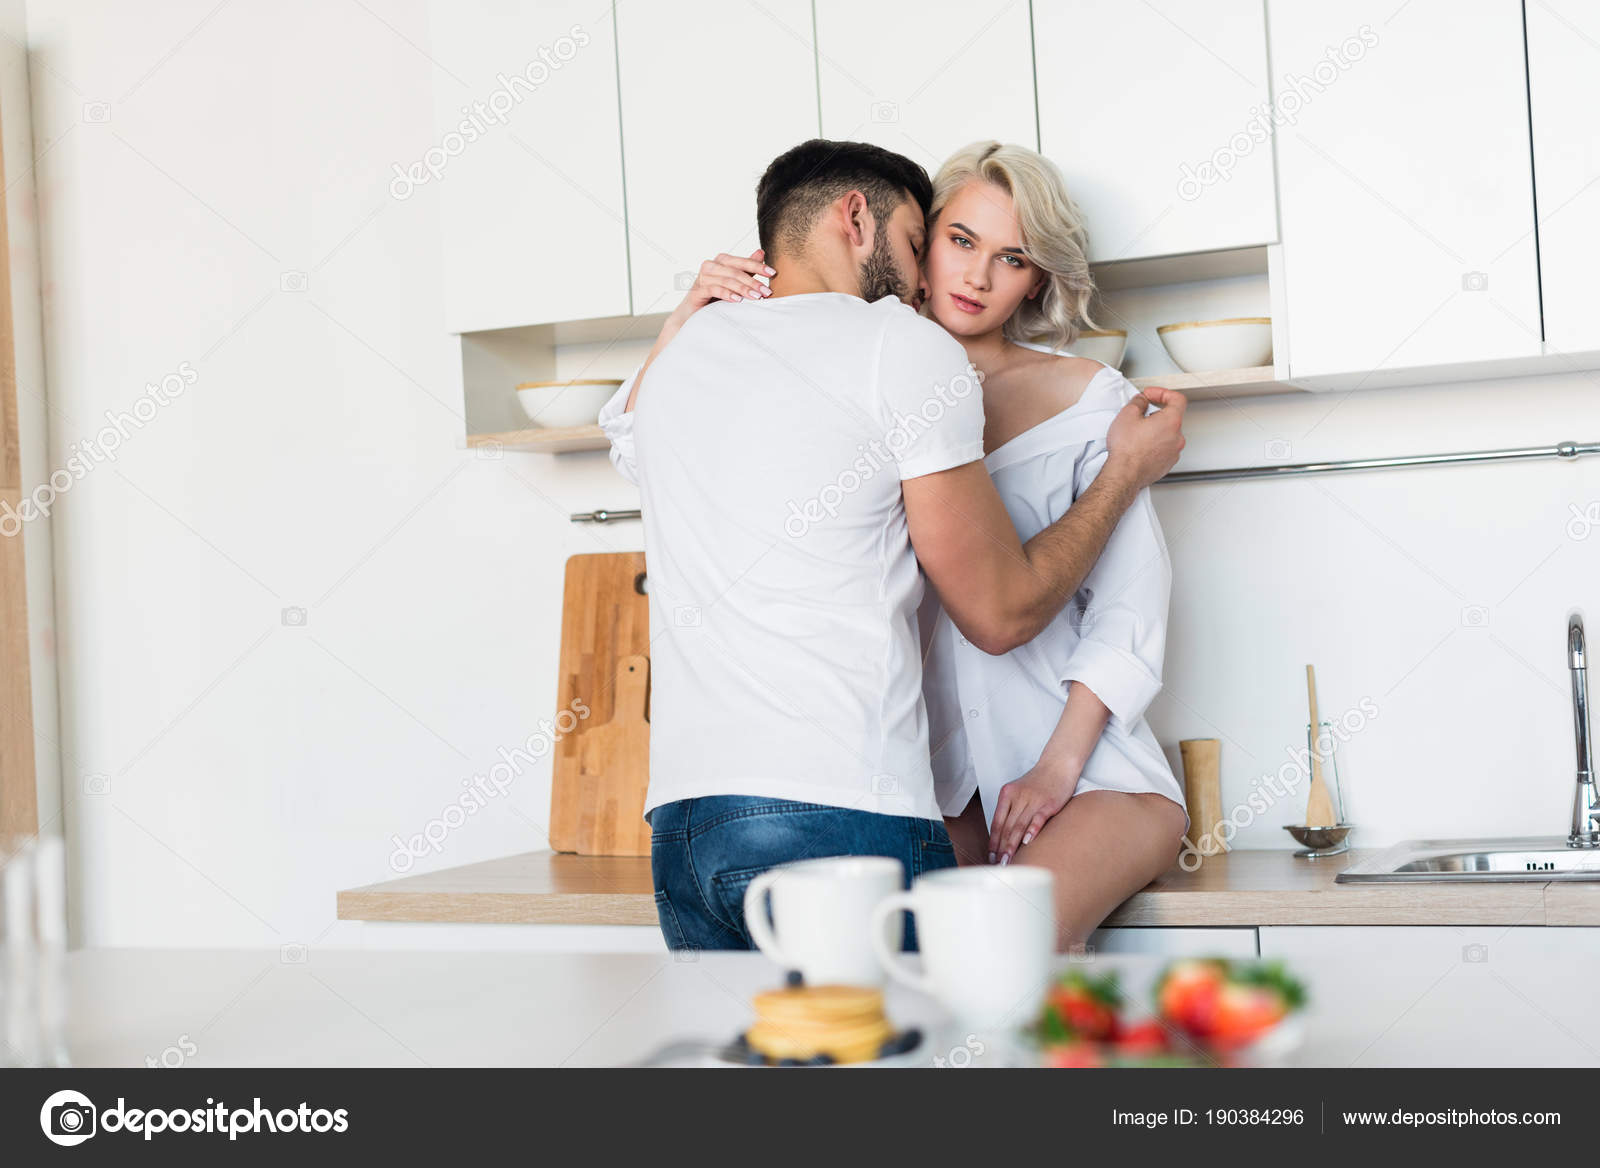 Stock Photo Of Guy Looking At Other Girl